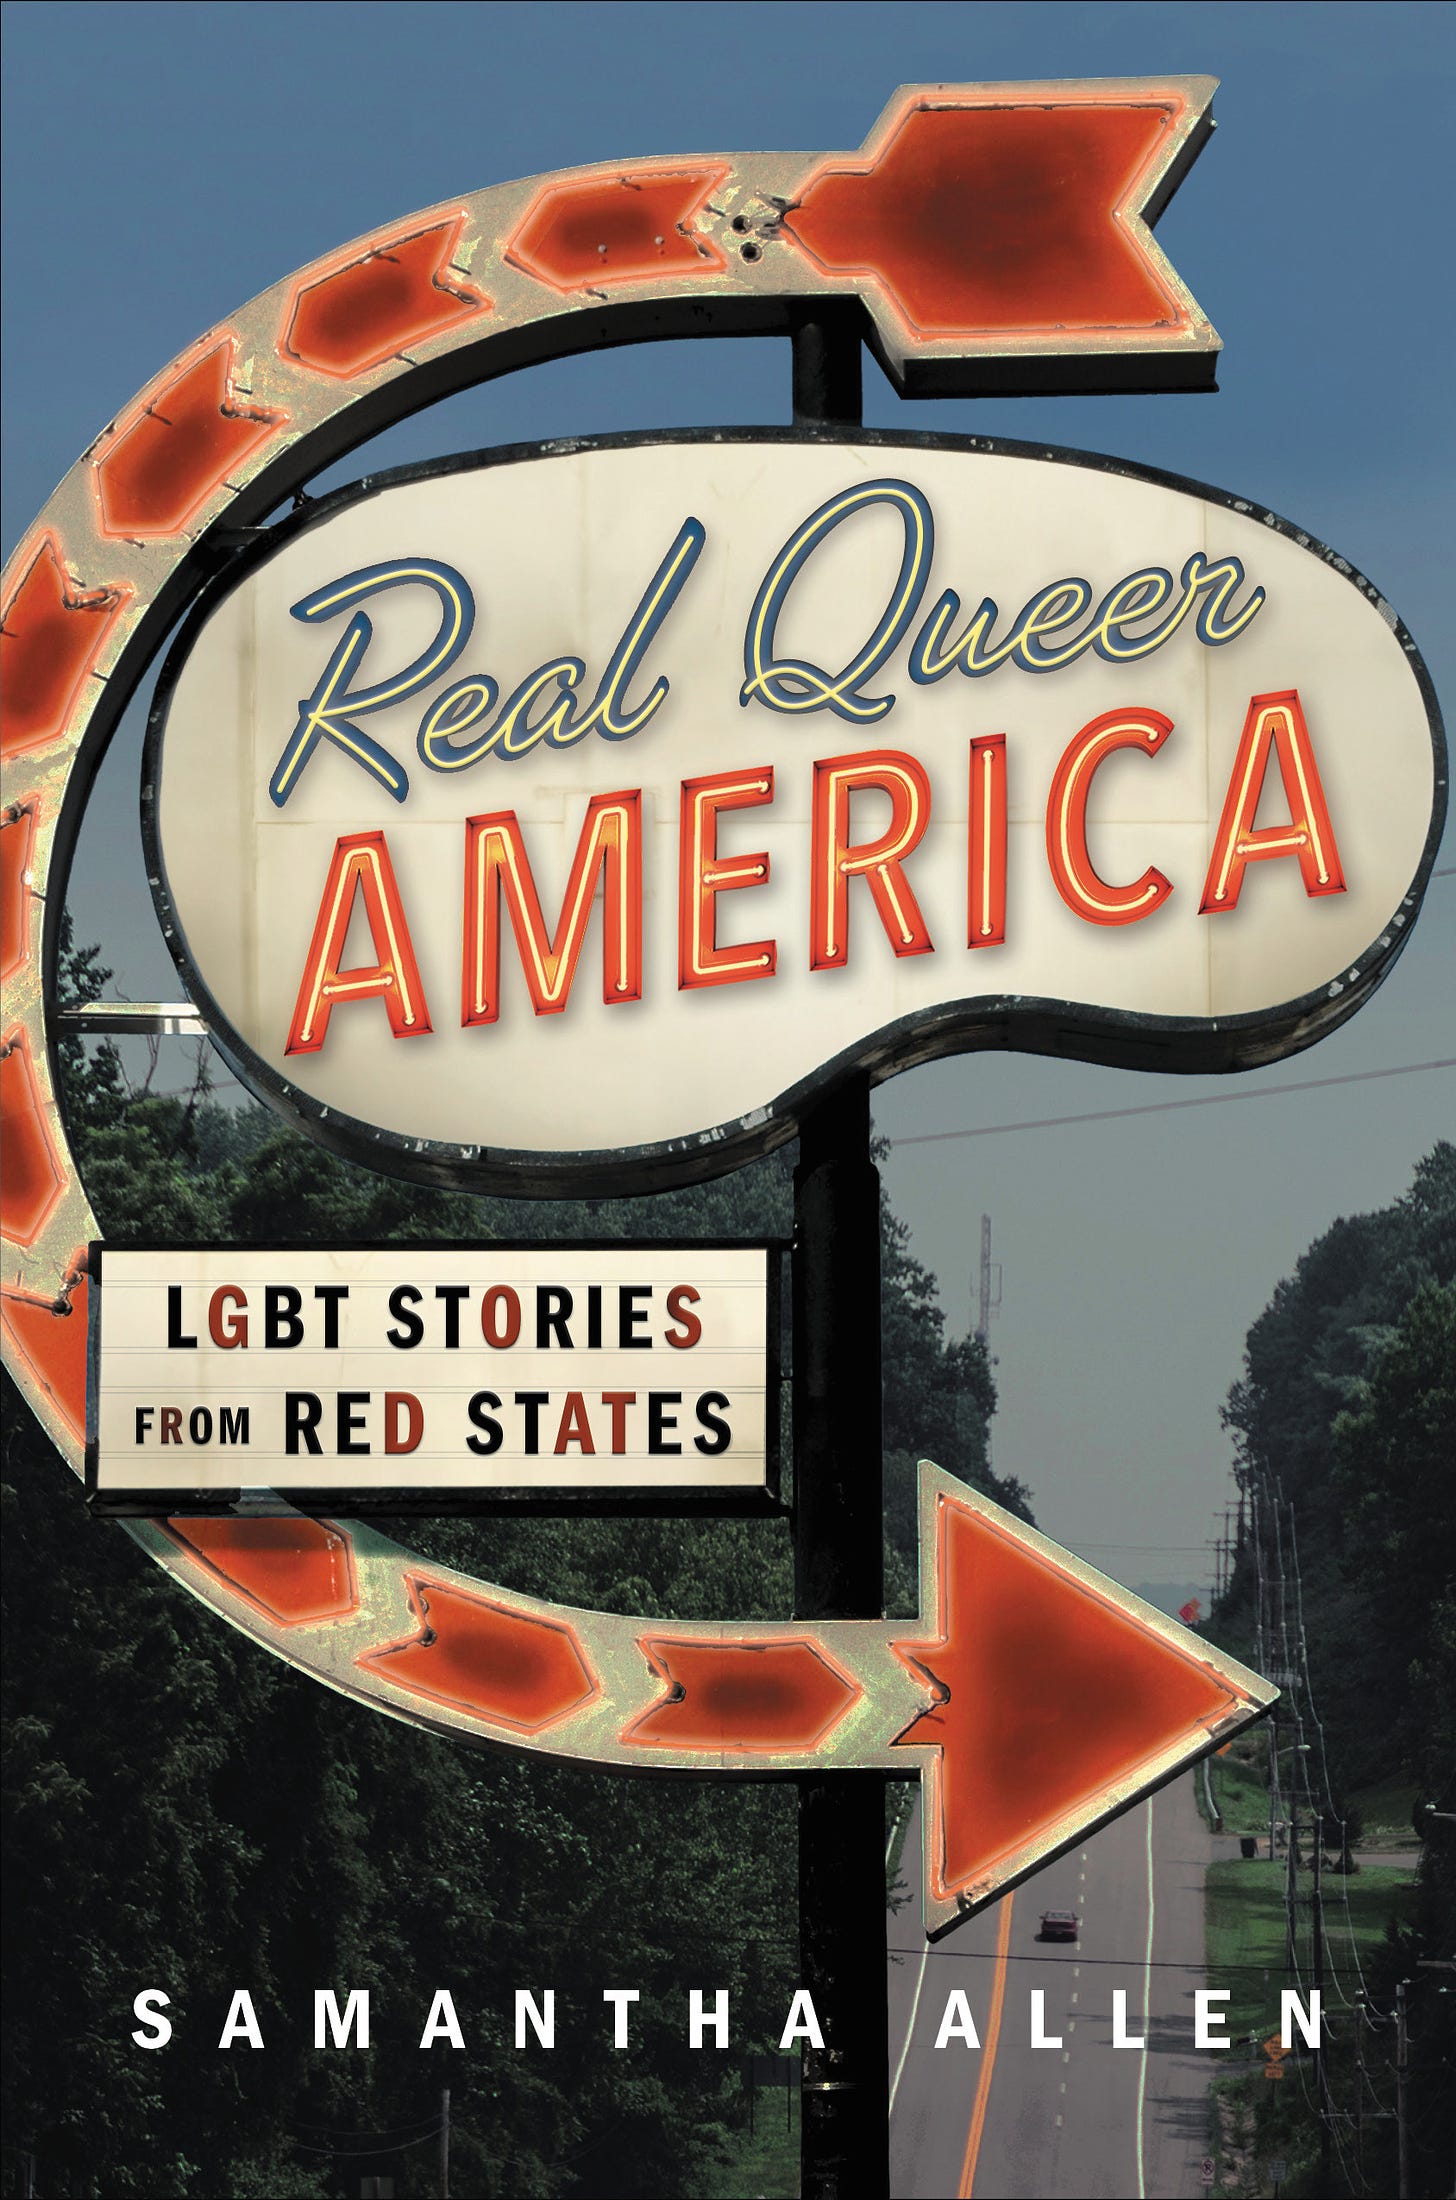 Book cover for Real Queer America